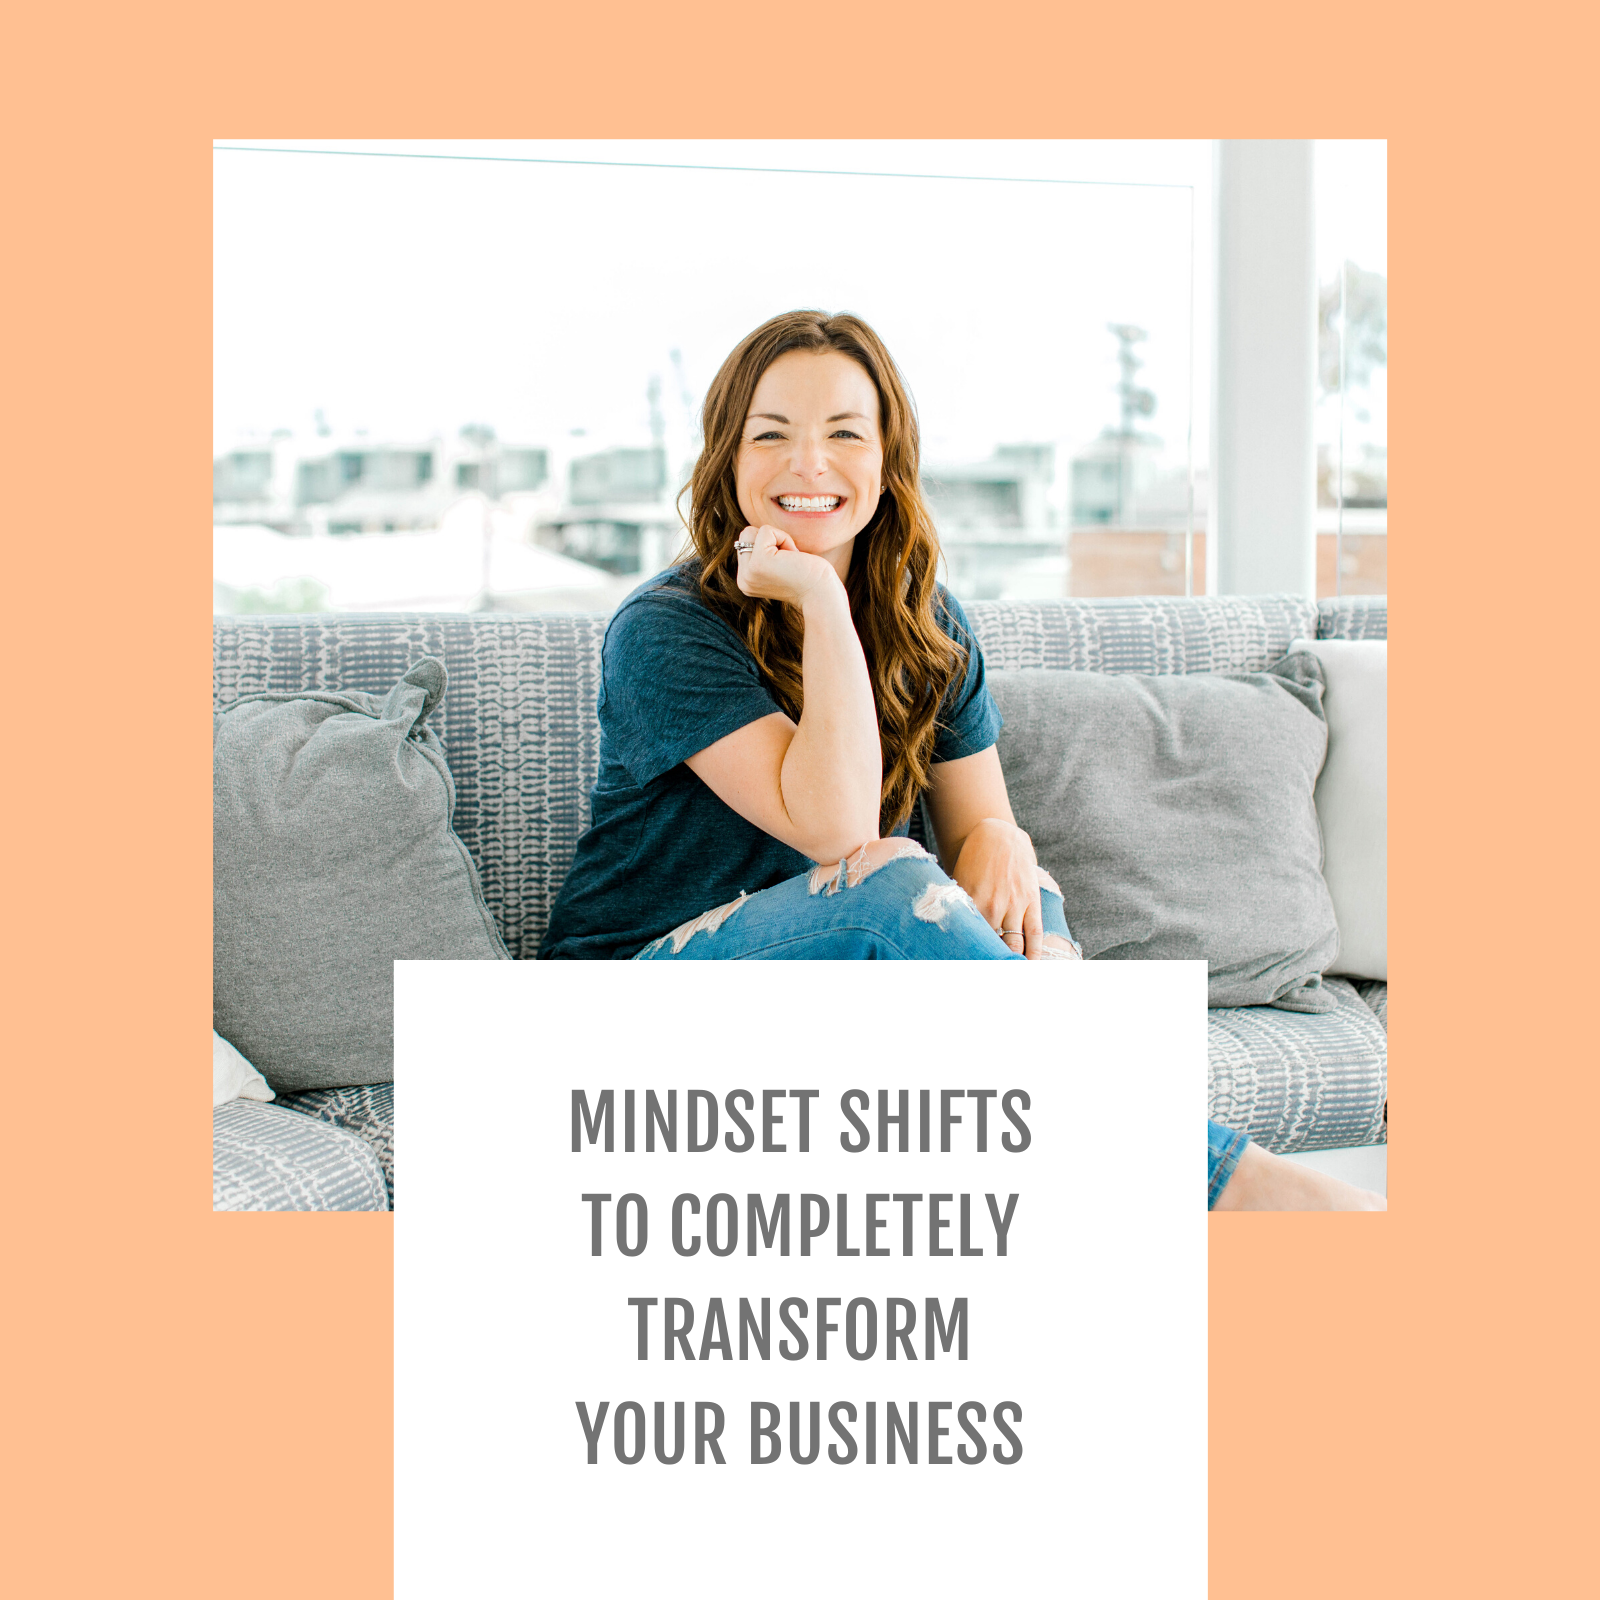 Episode #116-Mindset shifts to completely transform your business